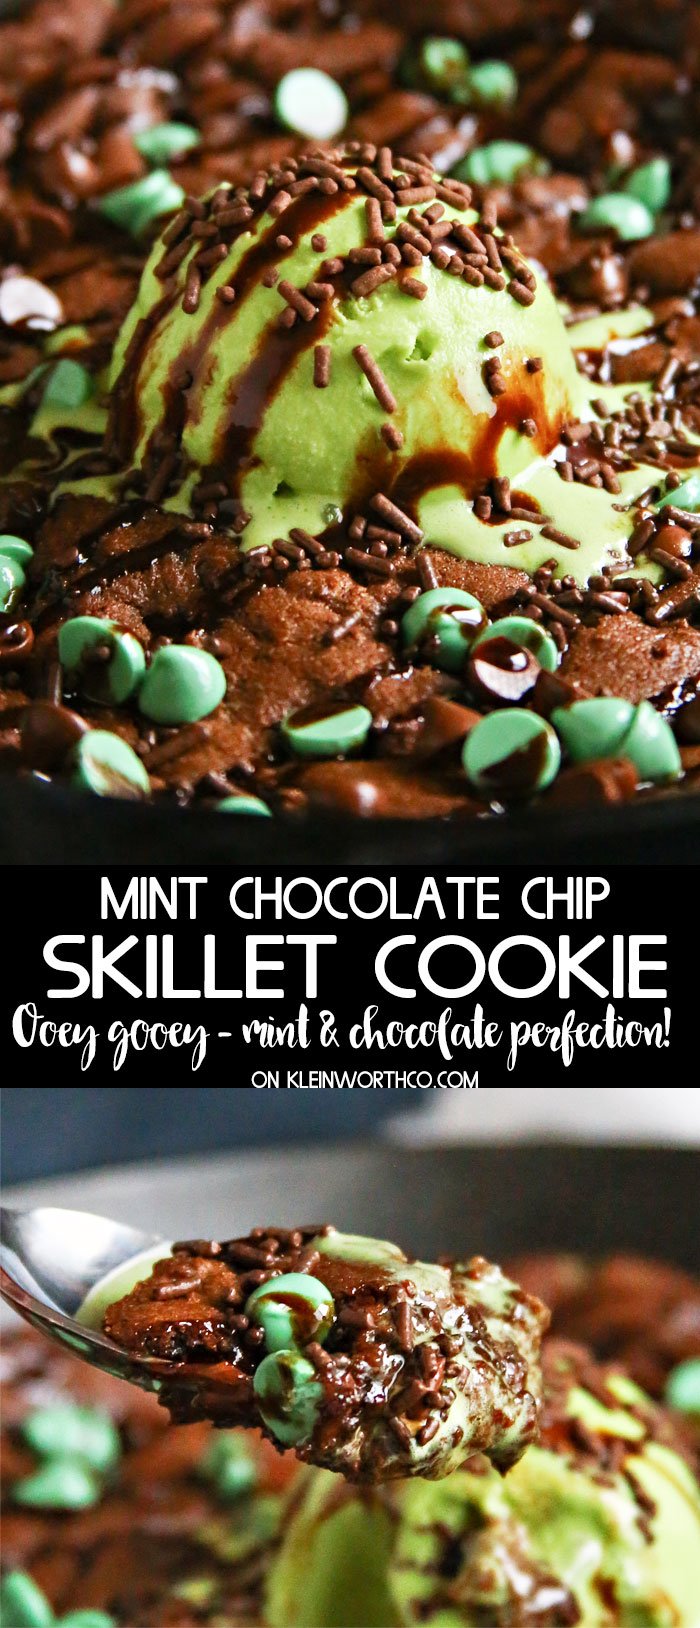 Mint Chocolate Chip Skillet Cookie